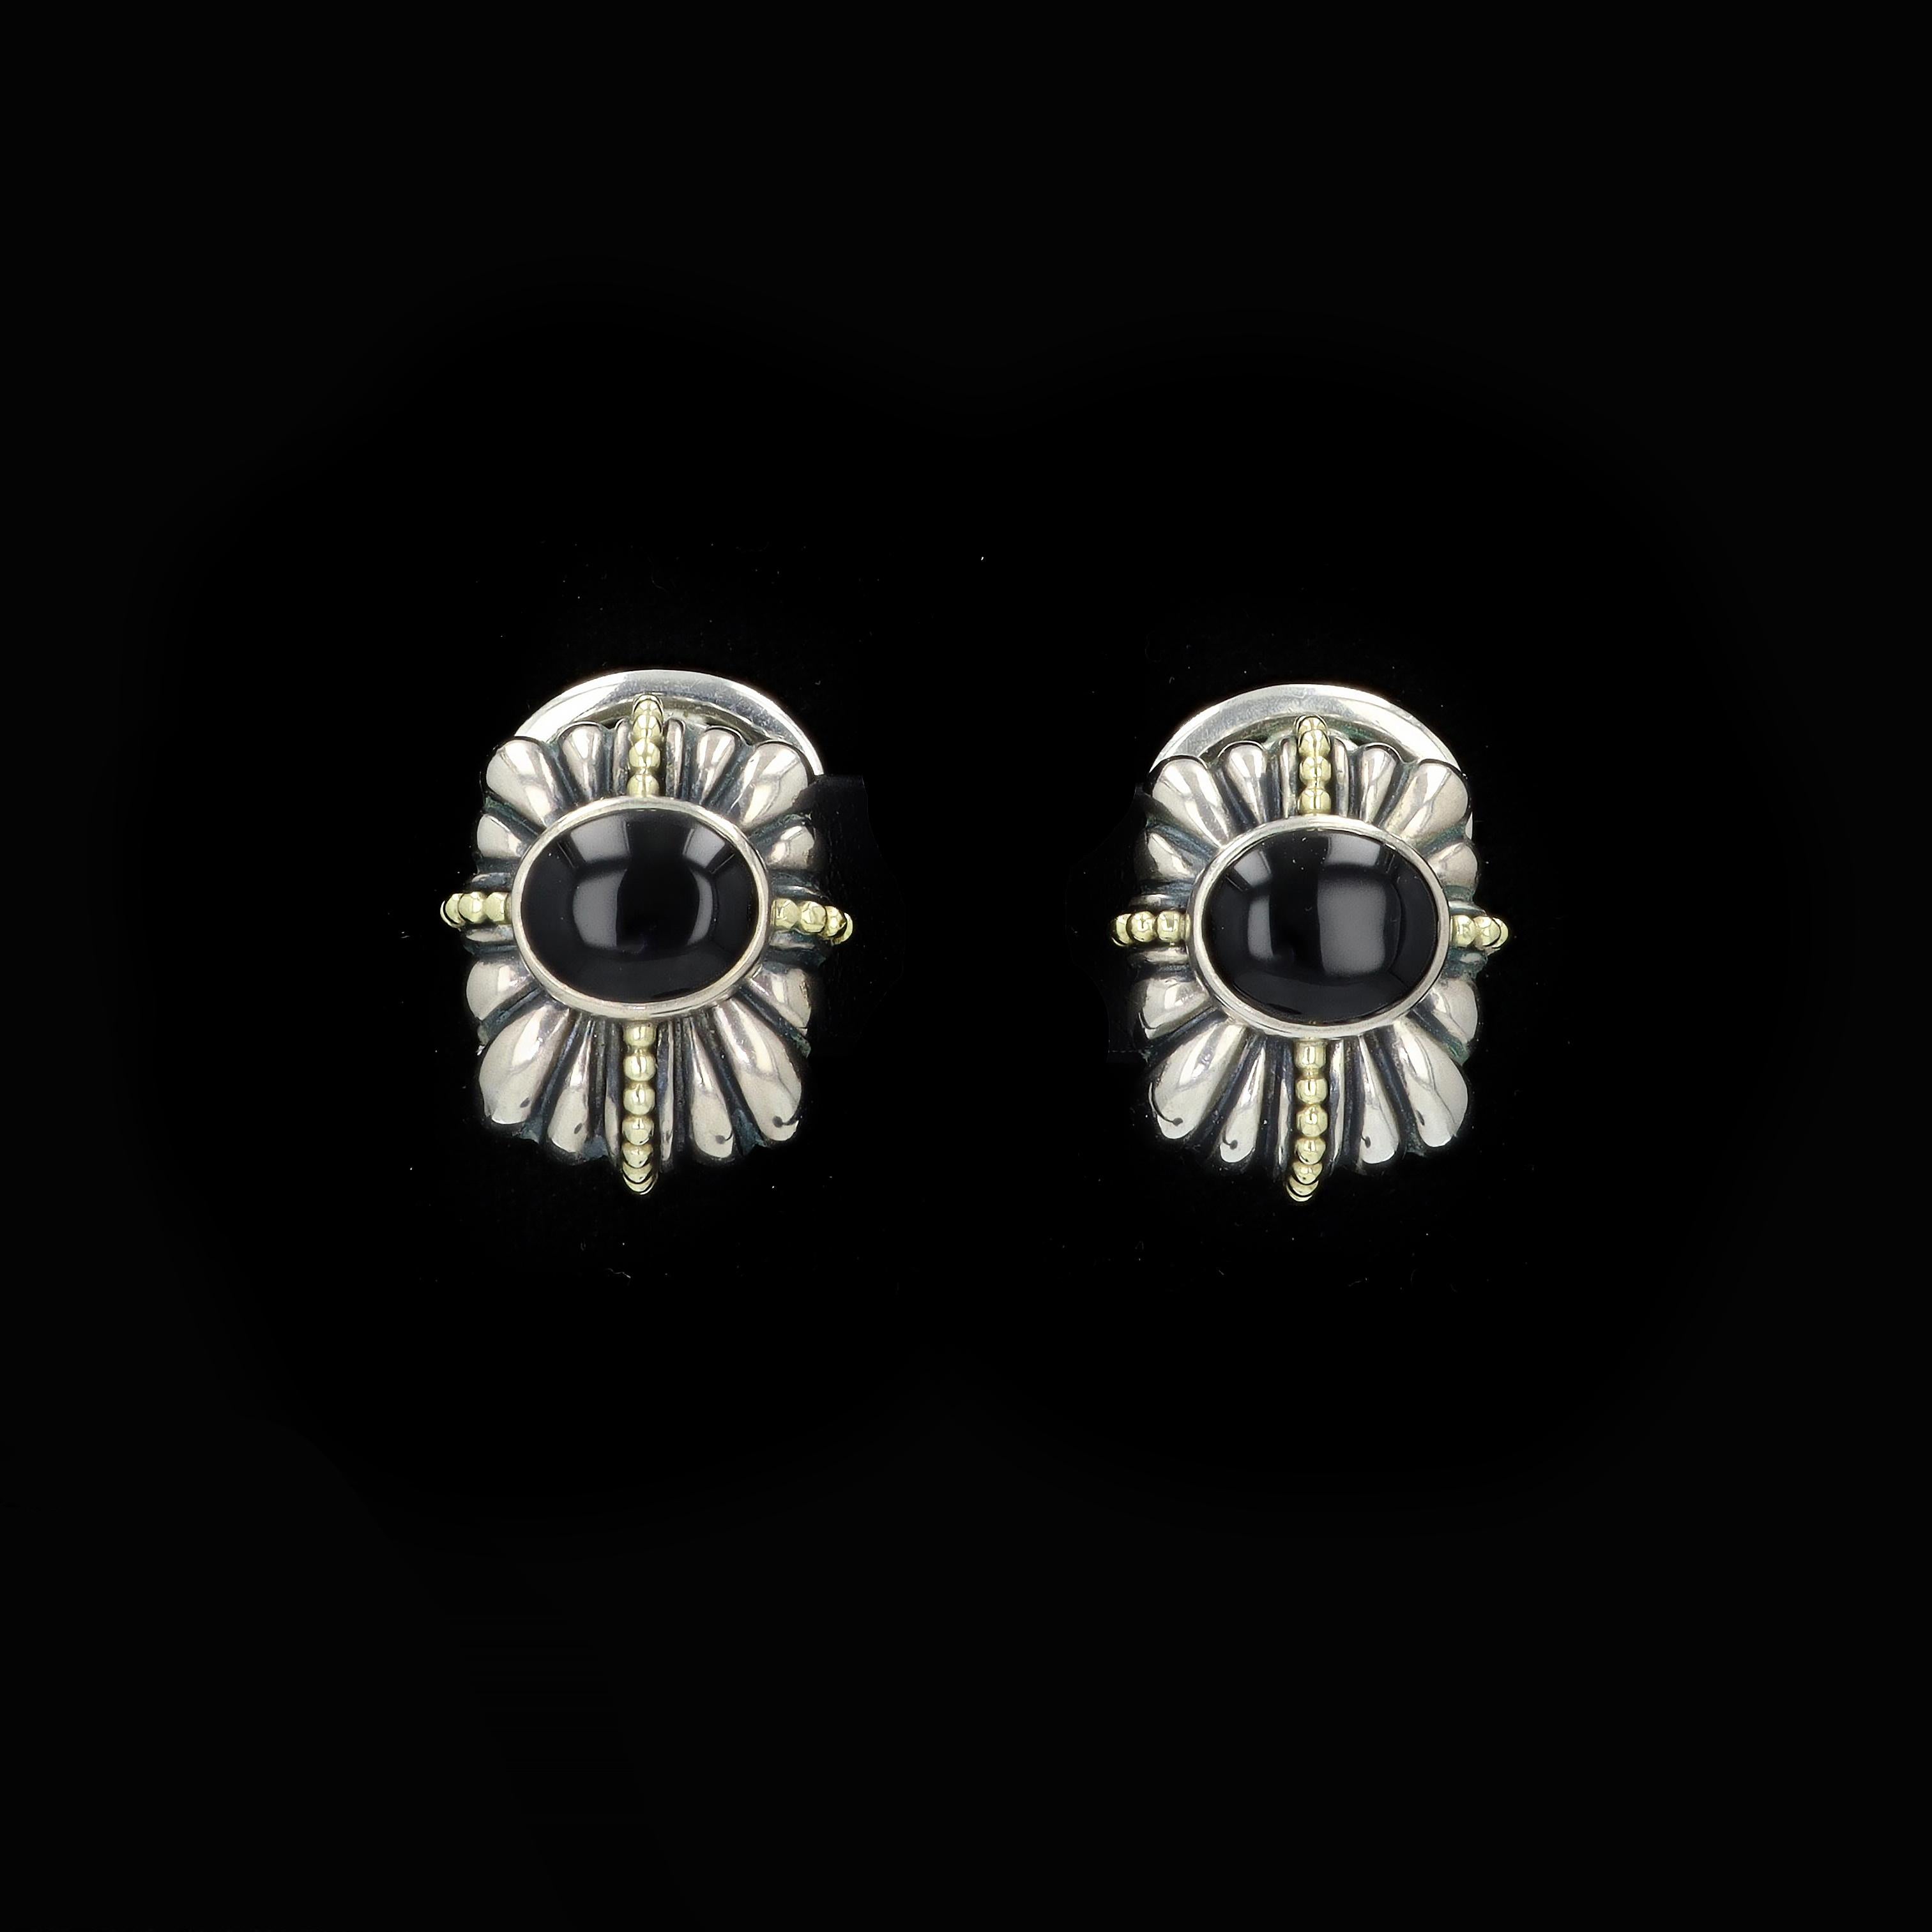 Oval Cut Stephen Lagos Sterling Silver Onyx Earrings with Gold Beading